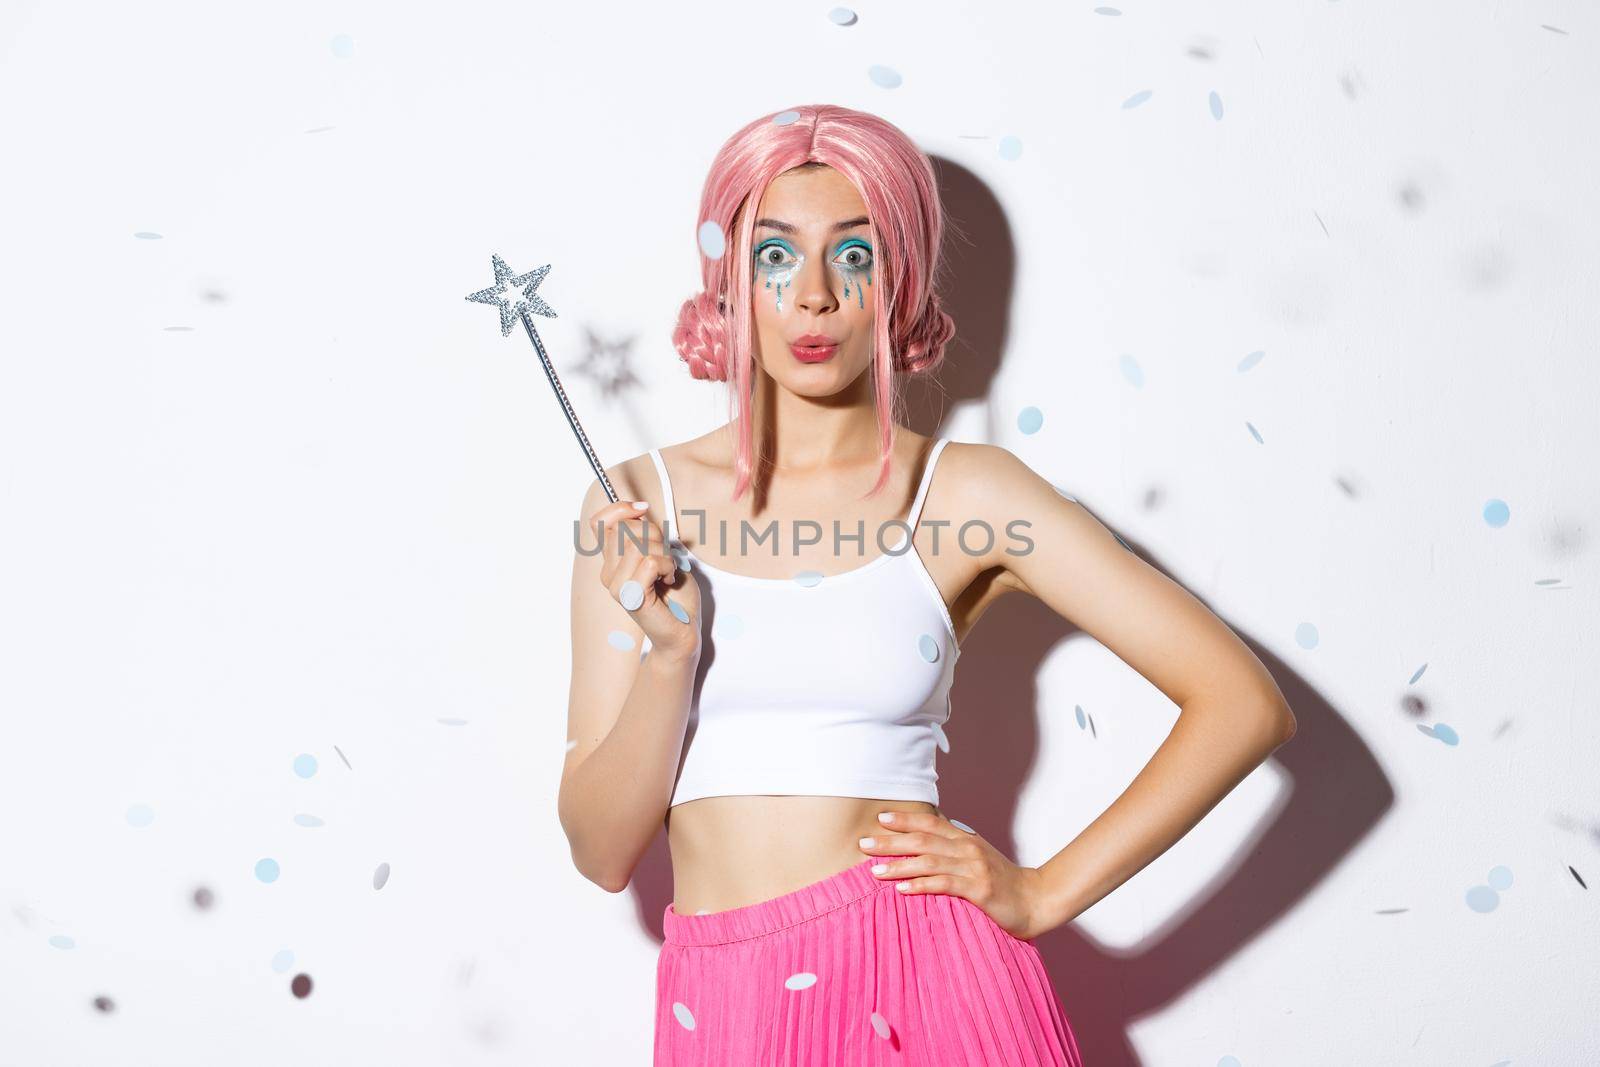 Attractive girl with magic wand celebrating halloween in fairy costume and pink wig, looking coquettish at camera, standing over white background while confetti falling down.